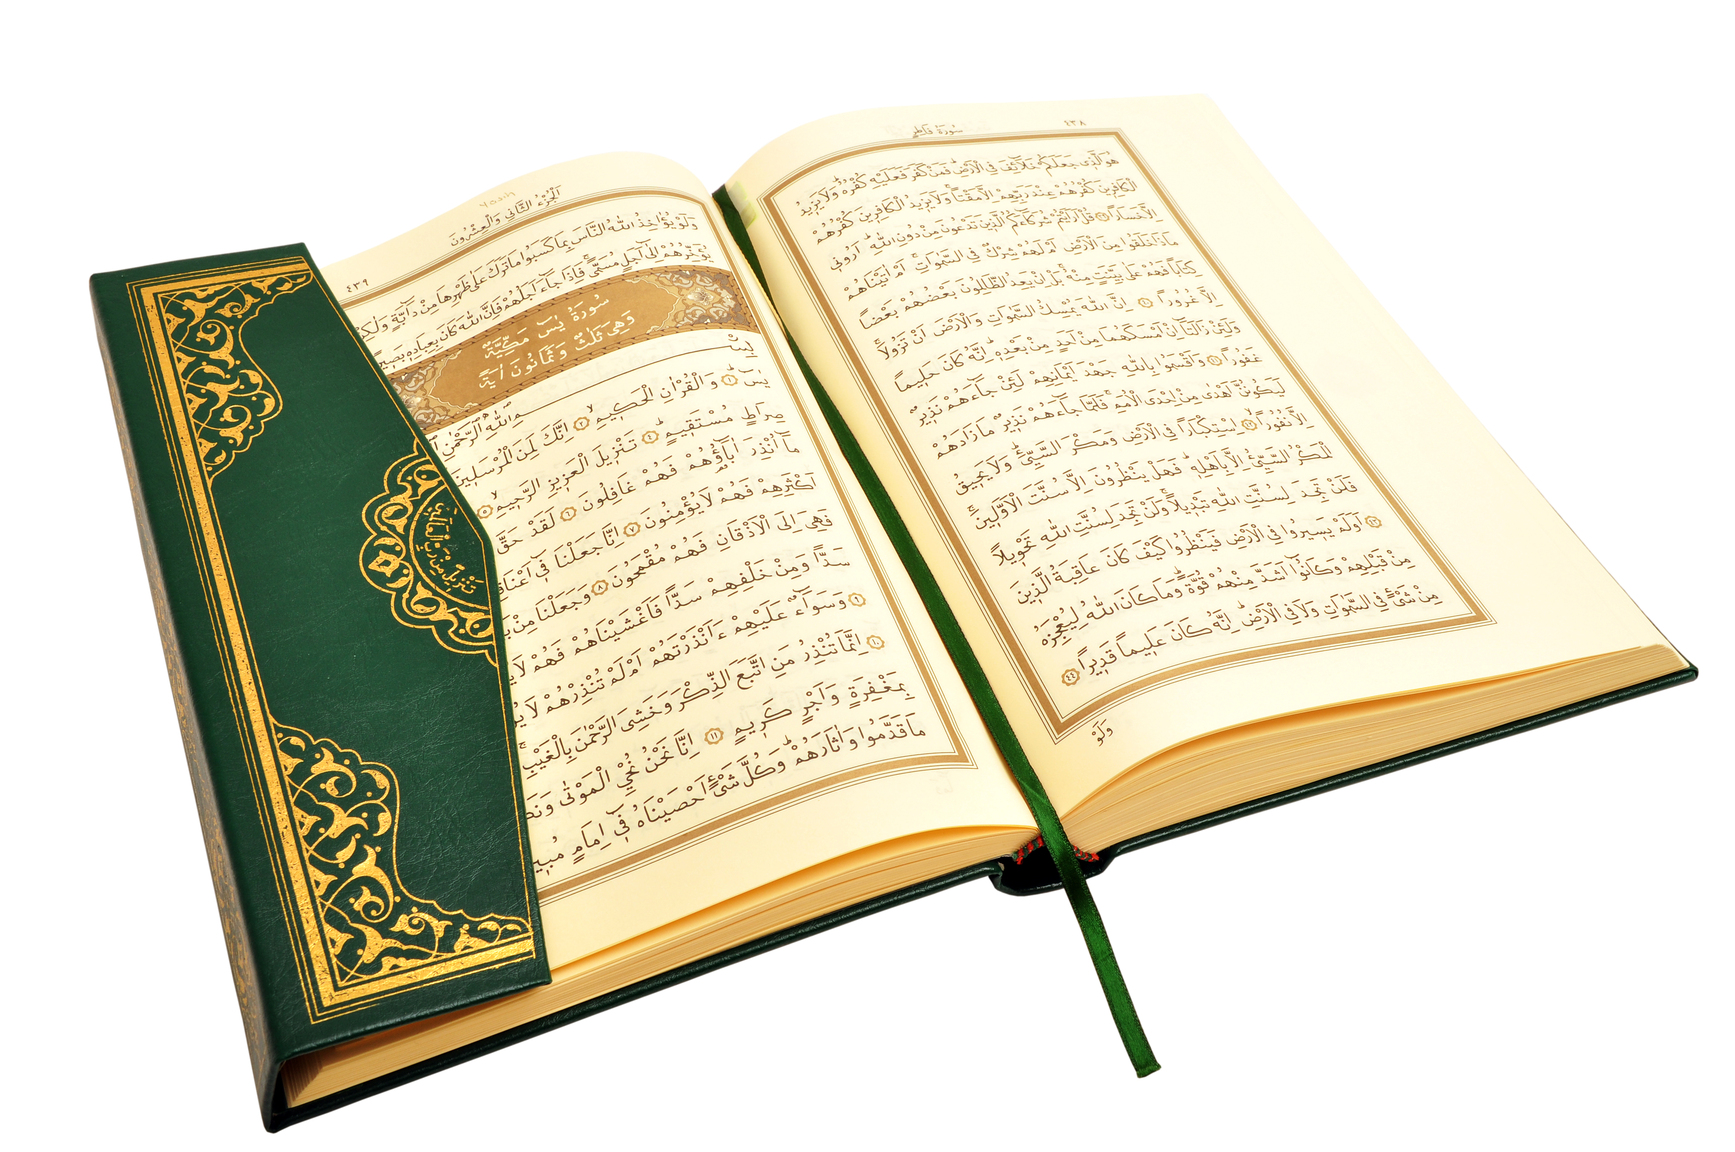 Pages of book of Quran